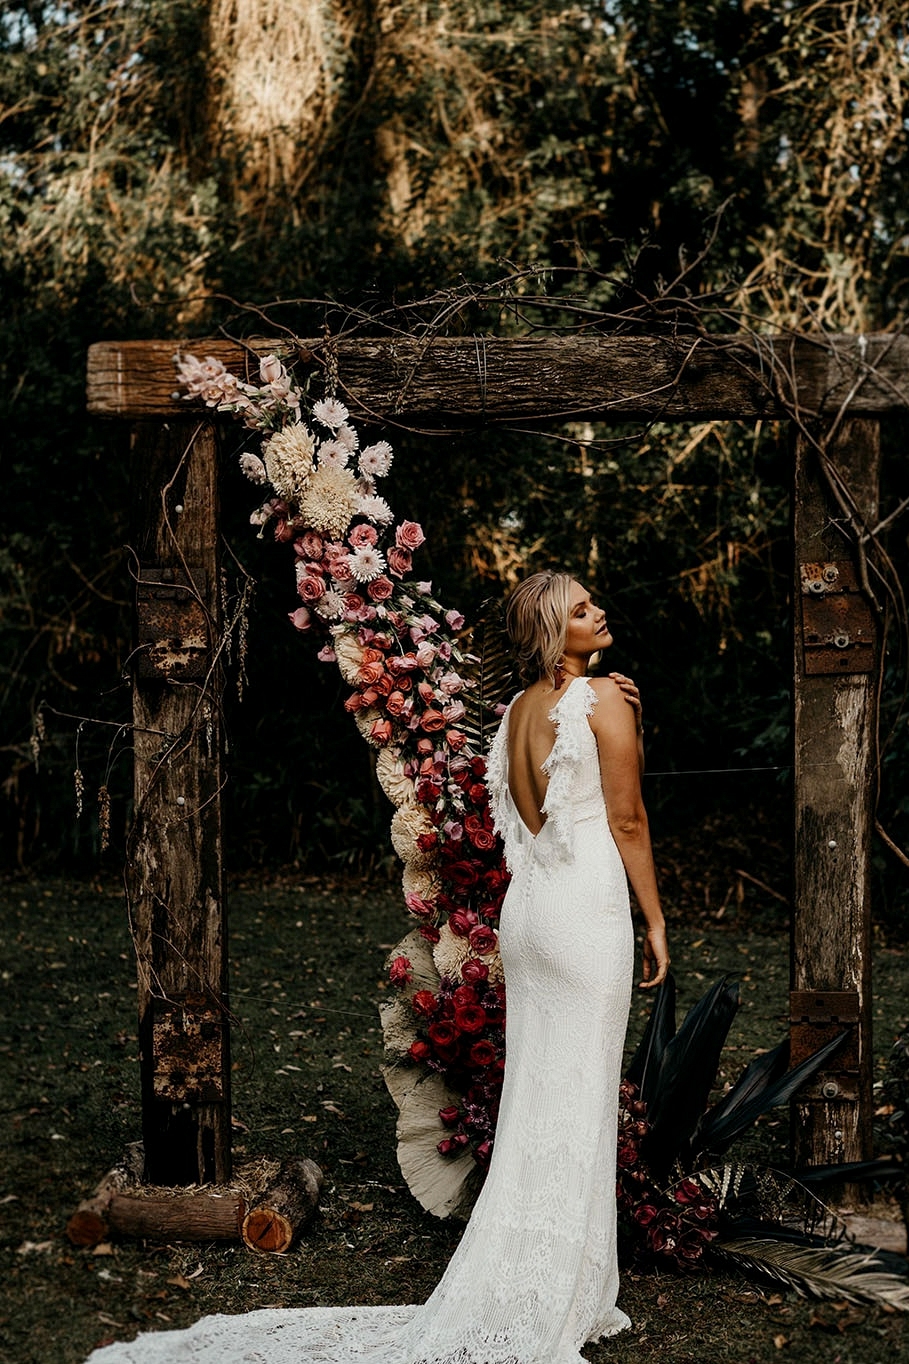 Natural Romantic Wedding Inspiration at a Rainforest Retreat | White Parrot Photography & Film